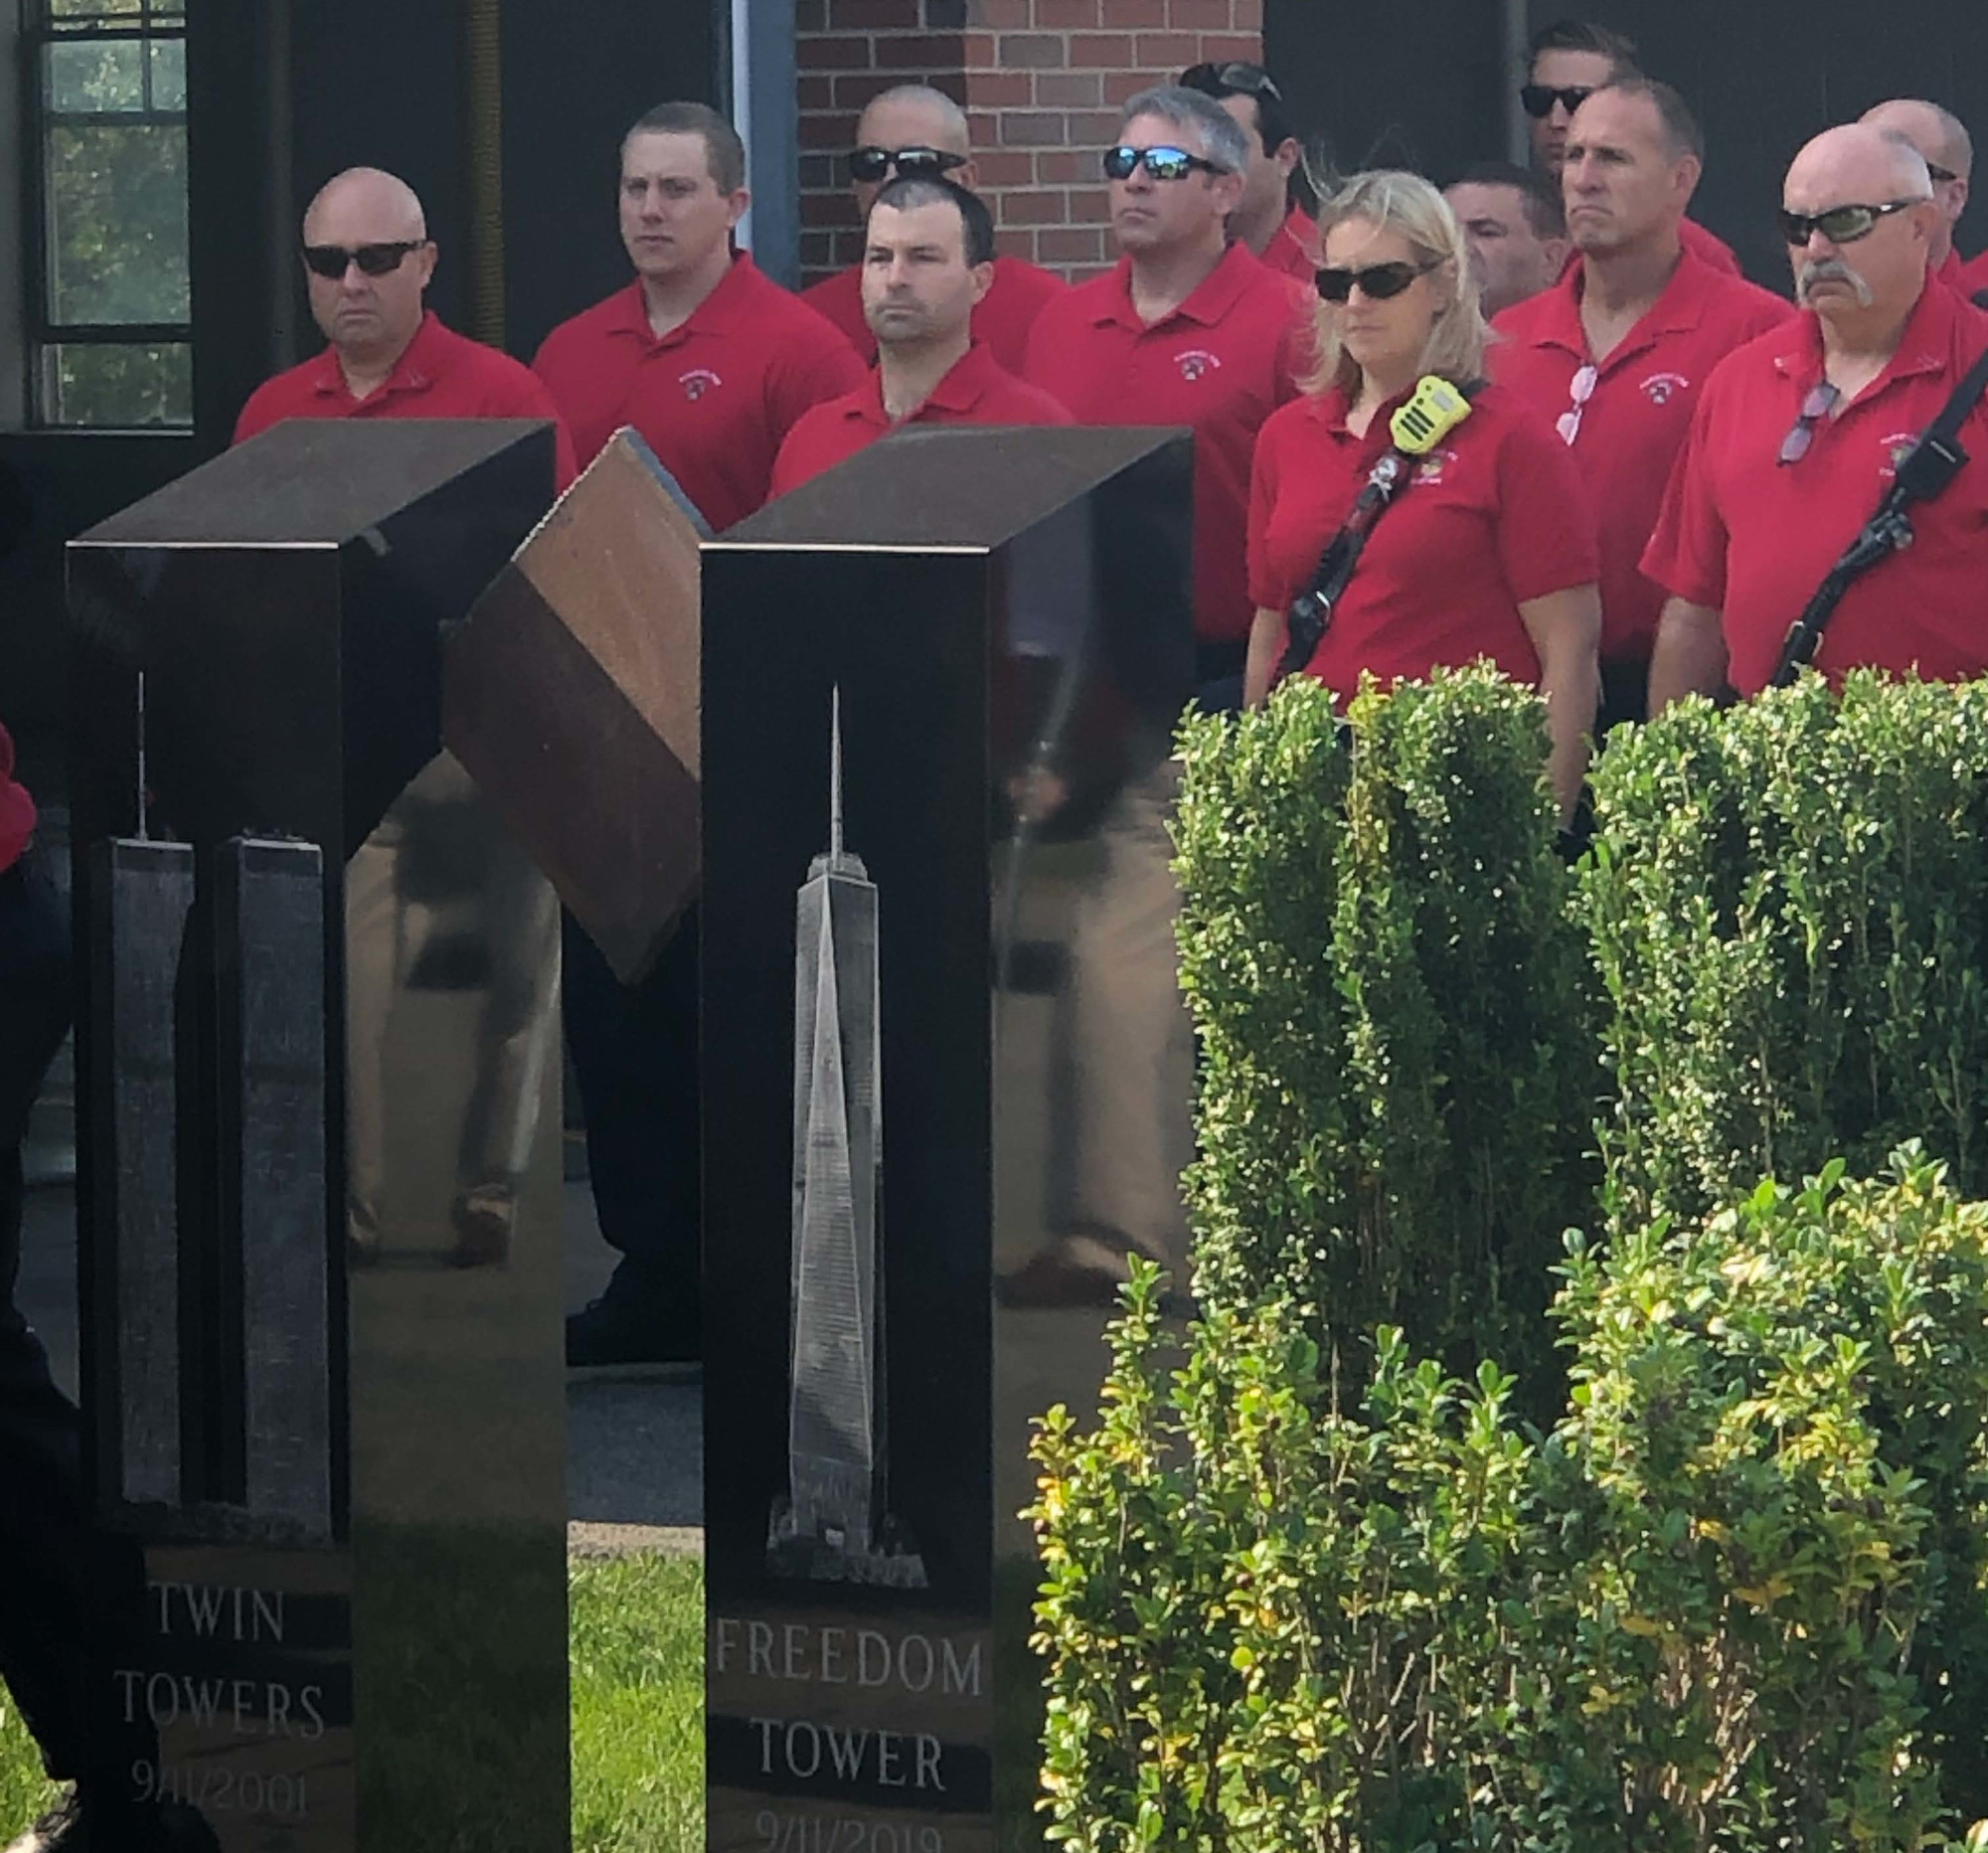 Harwich firefighters with 911 memorial